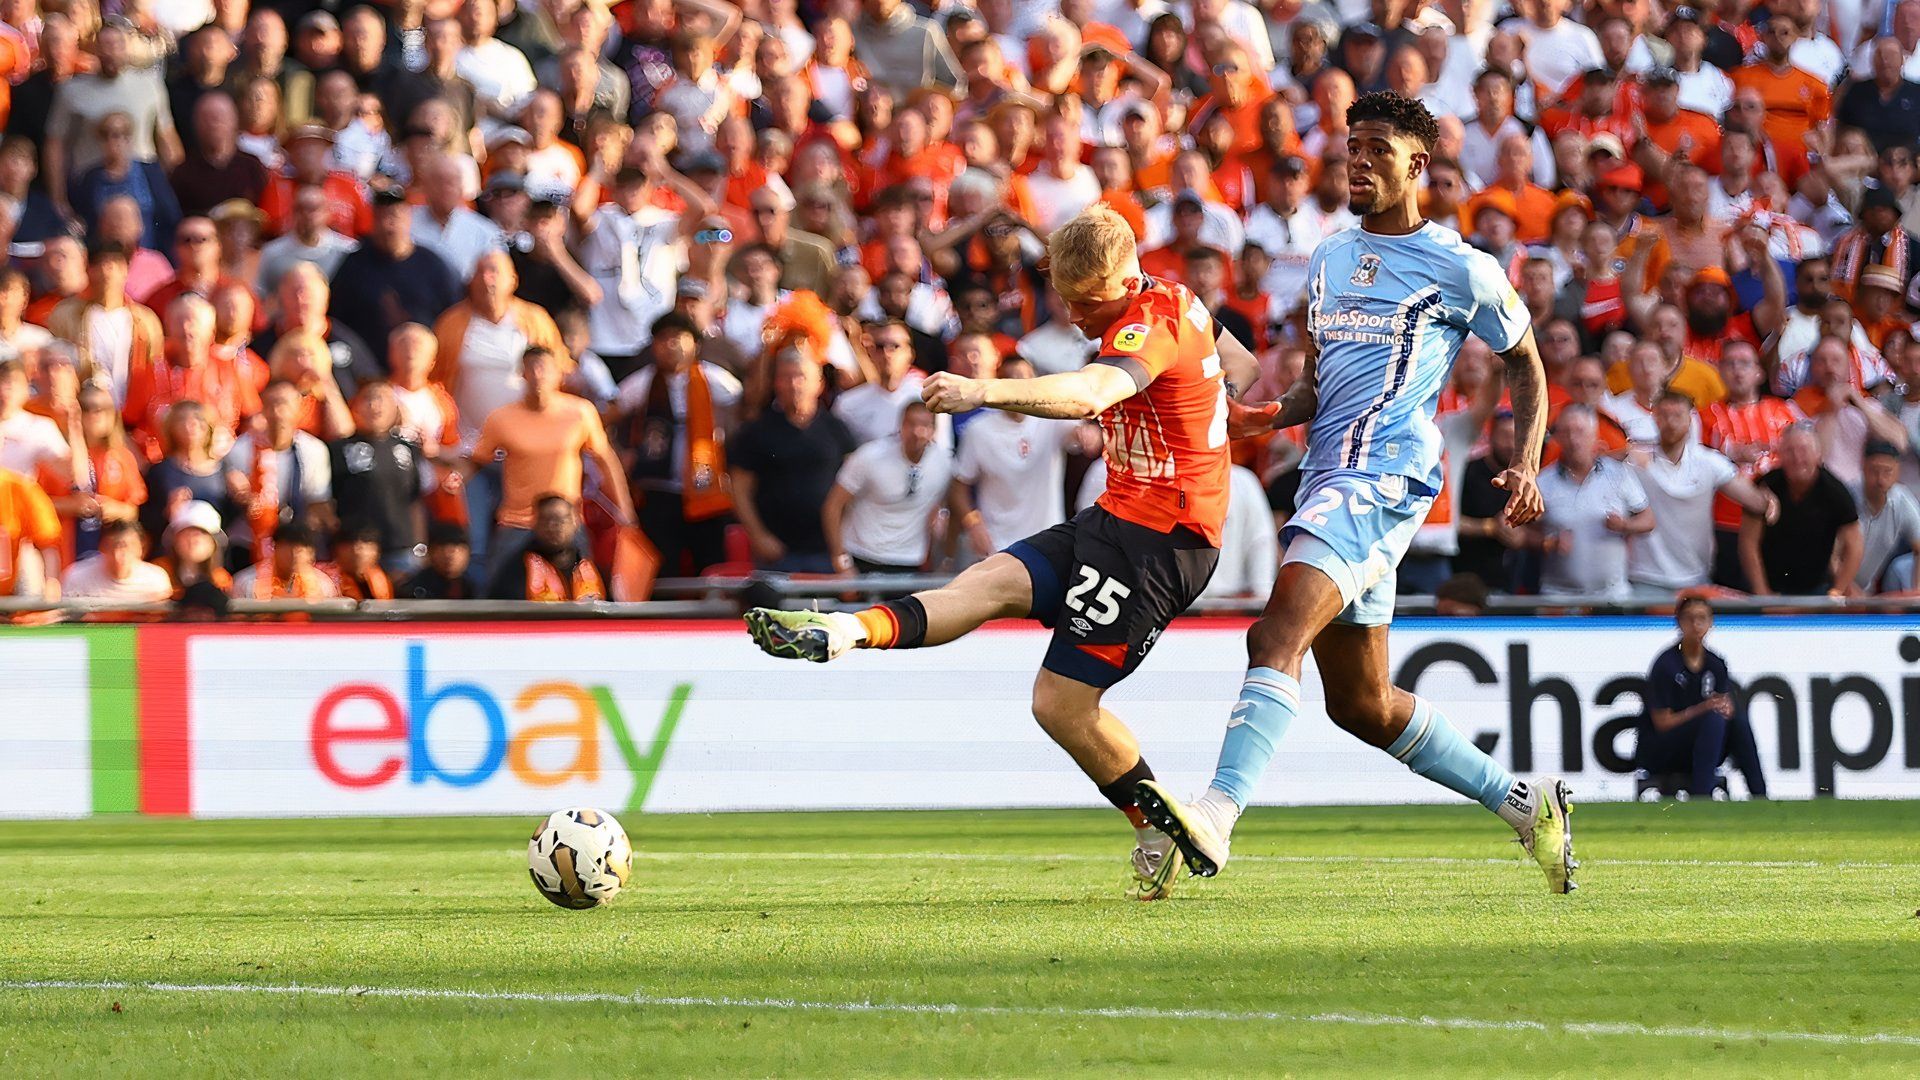 Joe Taylor playing for Luton against Coventry